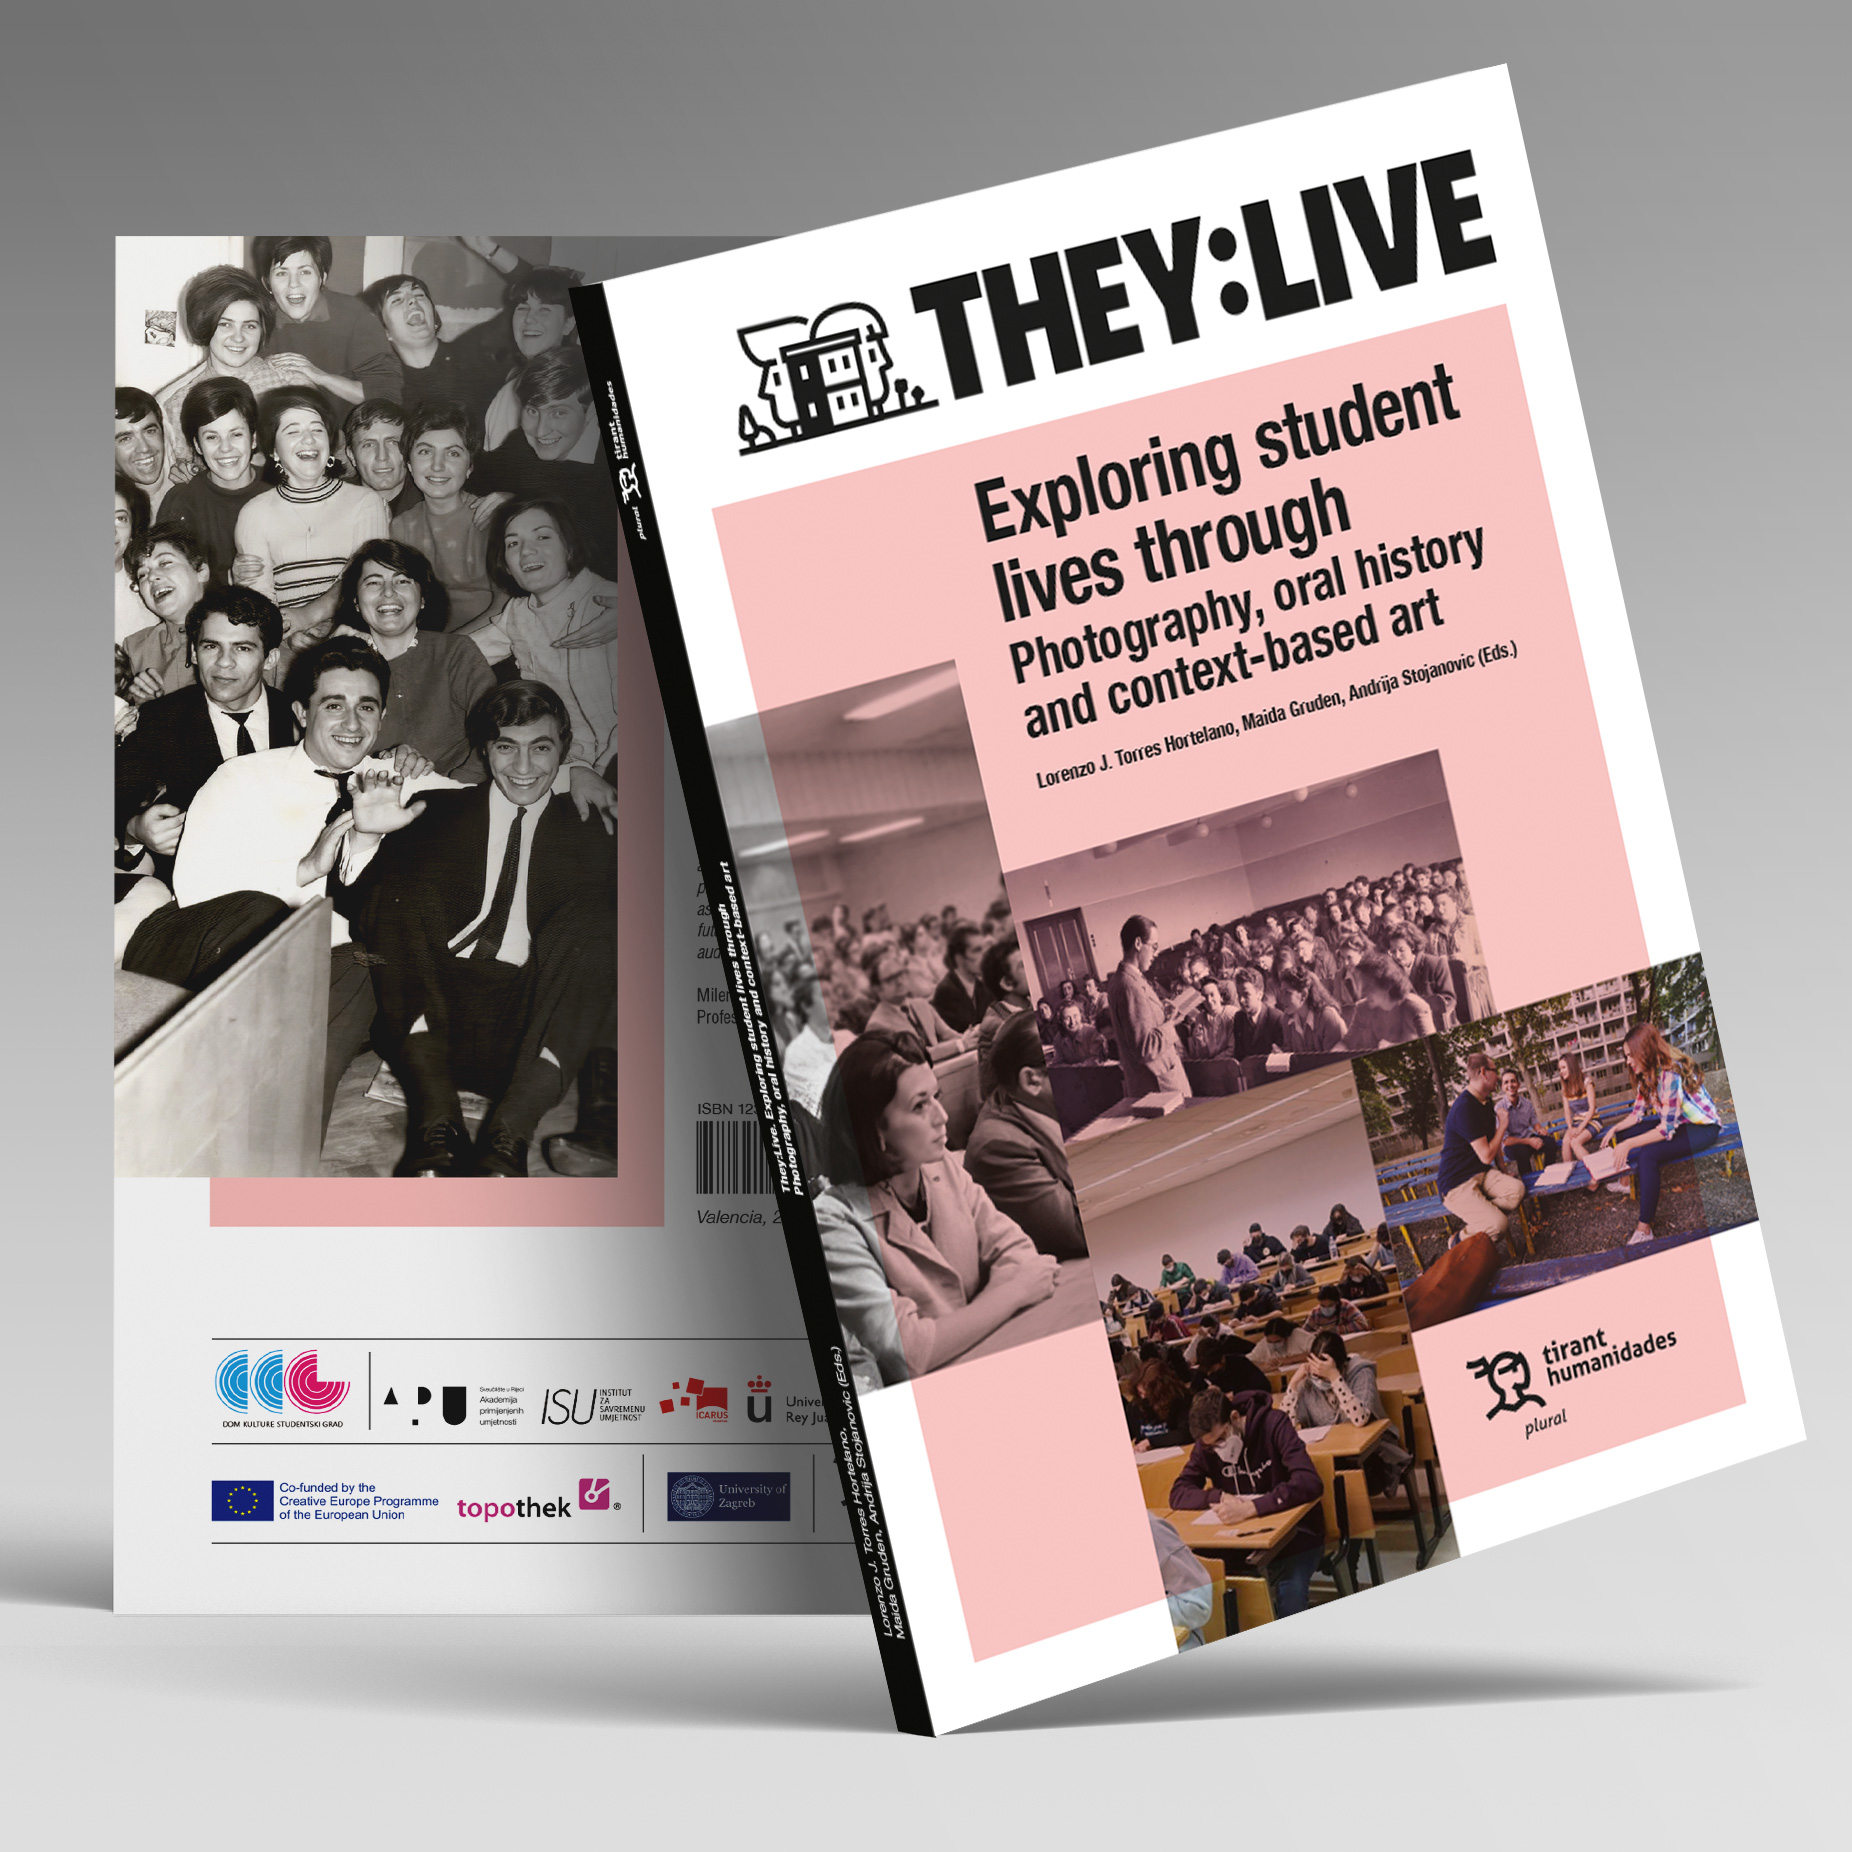 PROMOCIJA KNJIGE "THEY:LIVE. EXPLORING STUDENT LIVES THROUGH PHOTOGRAPHY, ORAL HISTORY AND CONTEXT-BASED ART" U MADRIDU